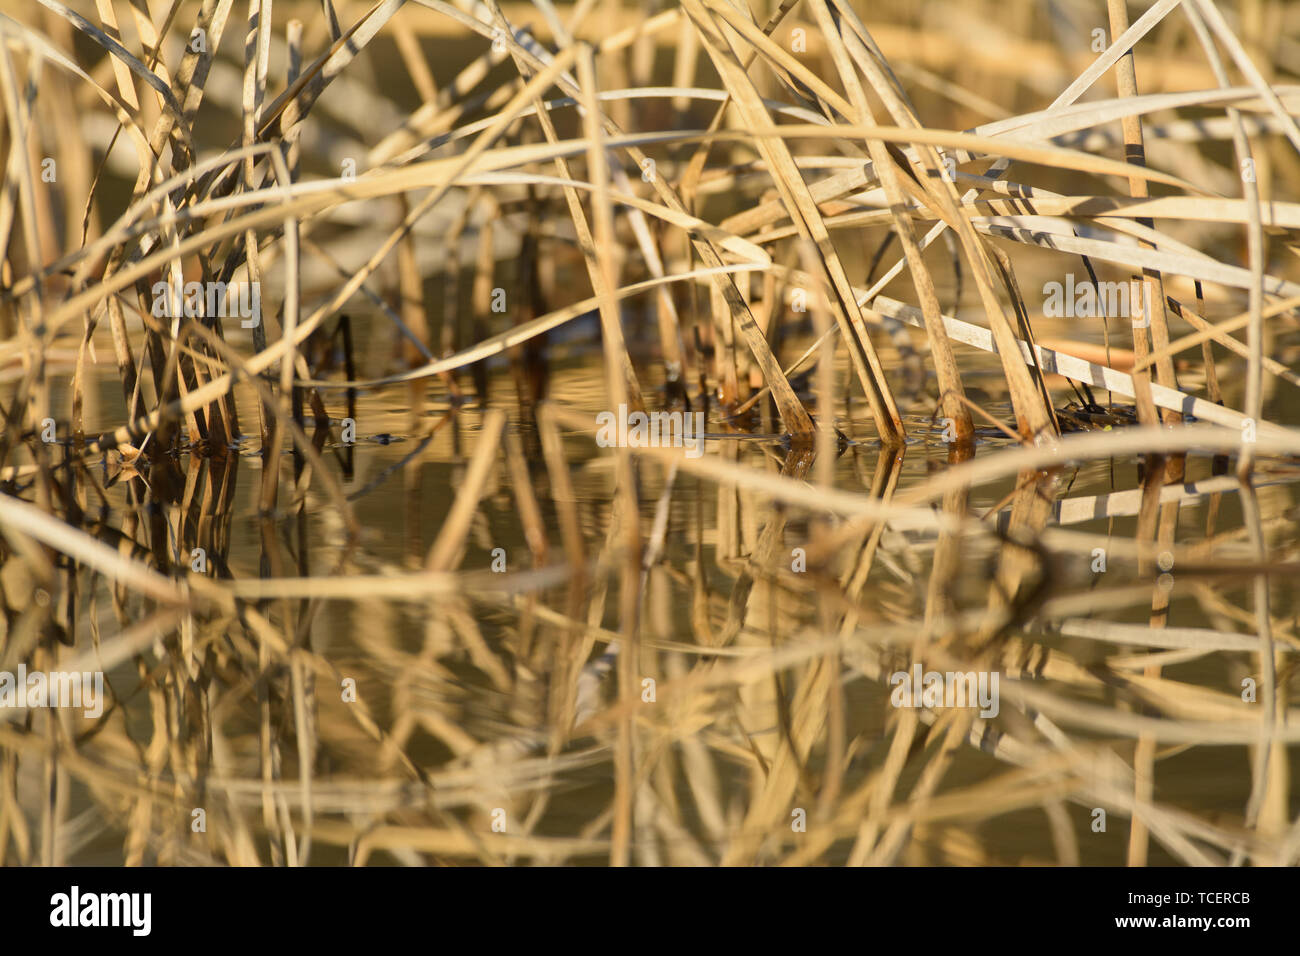 Closeup view of withered yellow sedge growing in lake Stock Photo